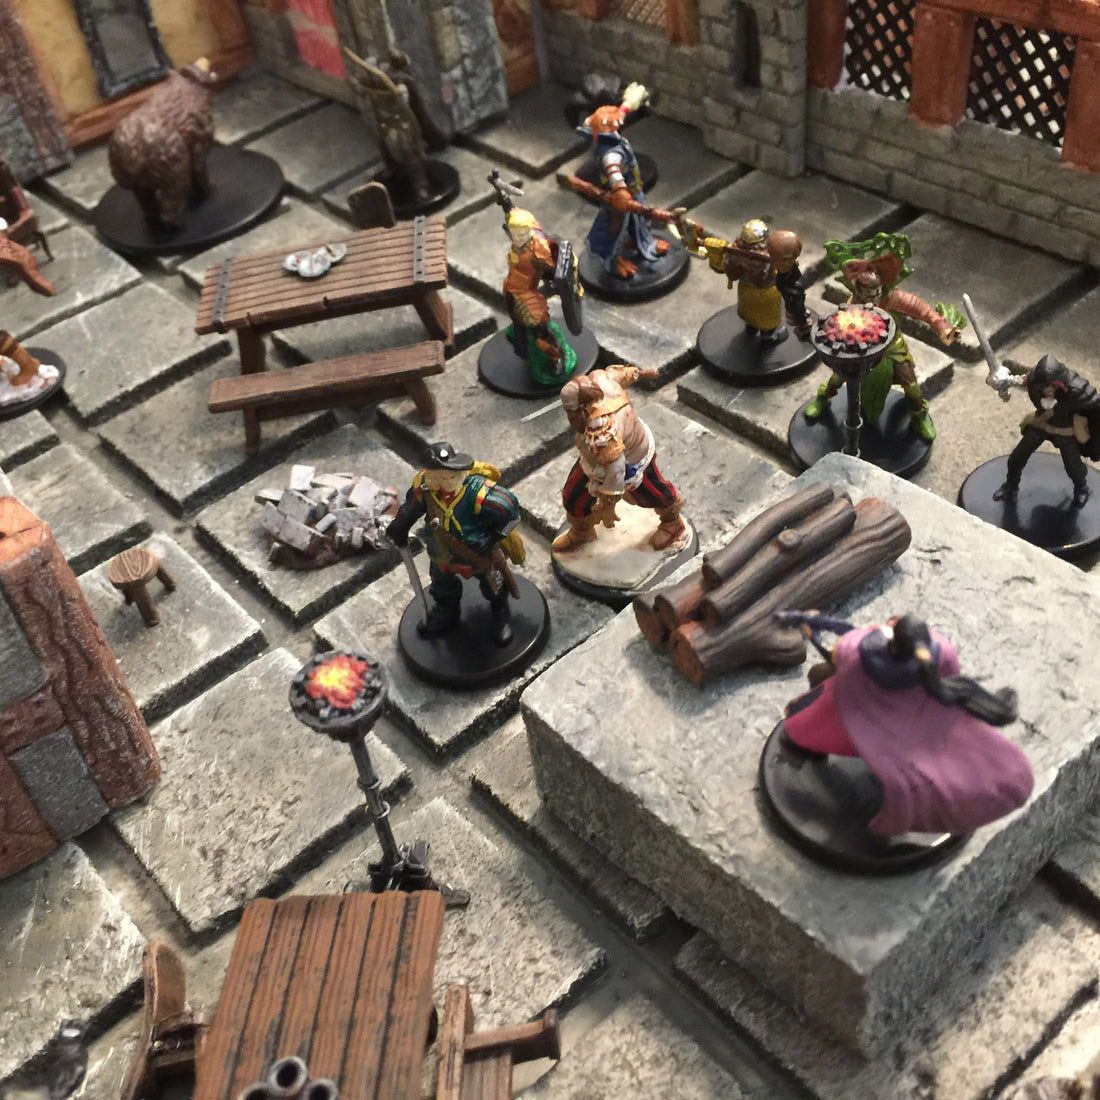 Make a texture roller to add stone textures to tabletop terrain in seconds!